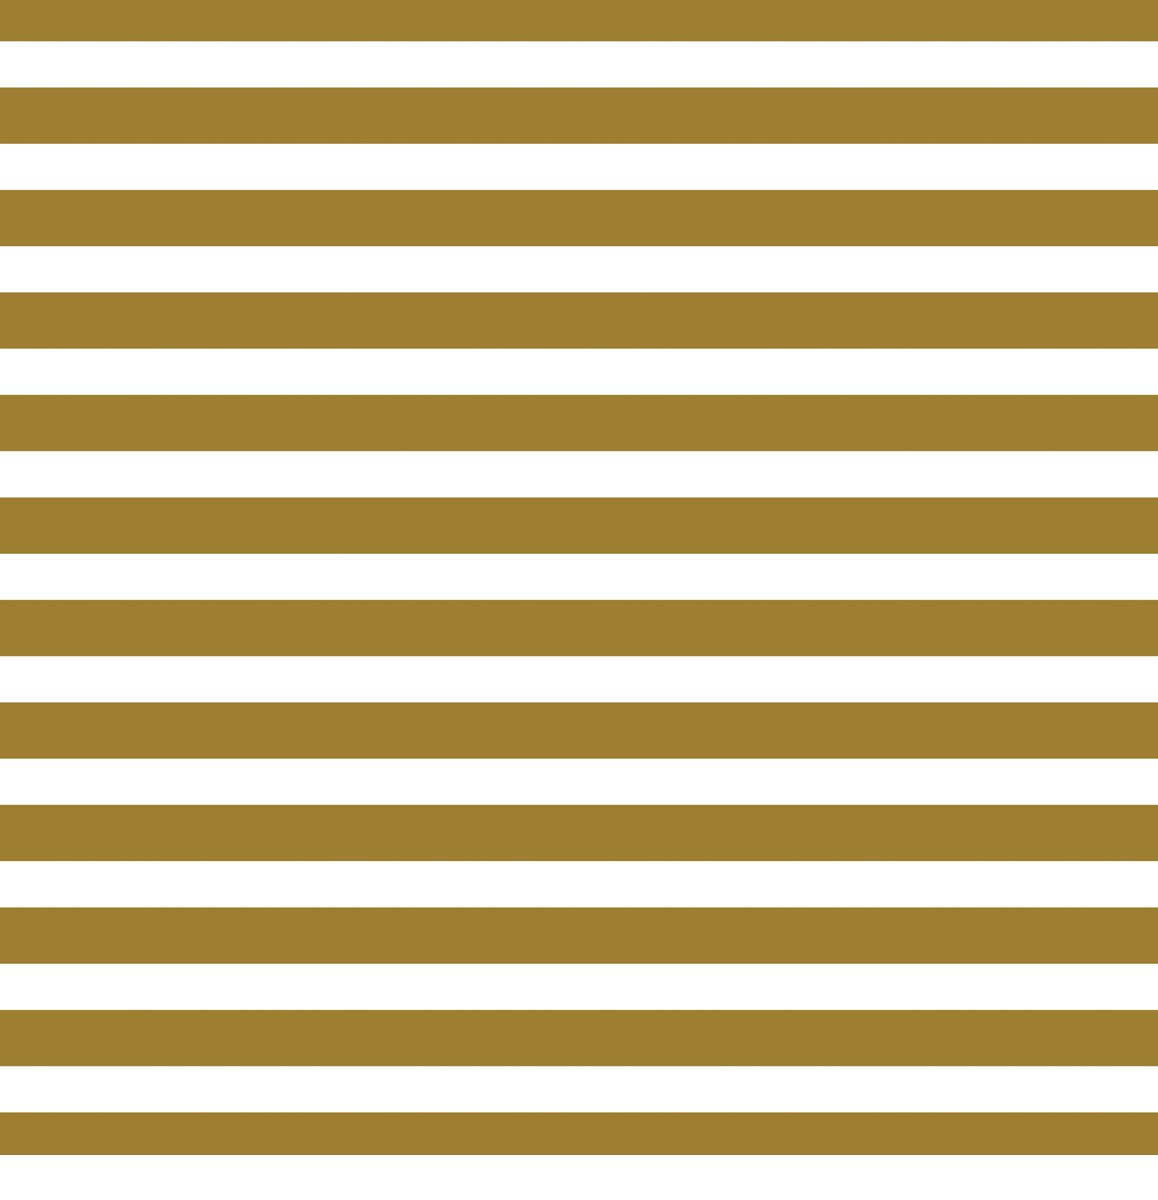 a brown and white striped background.